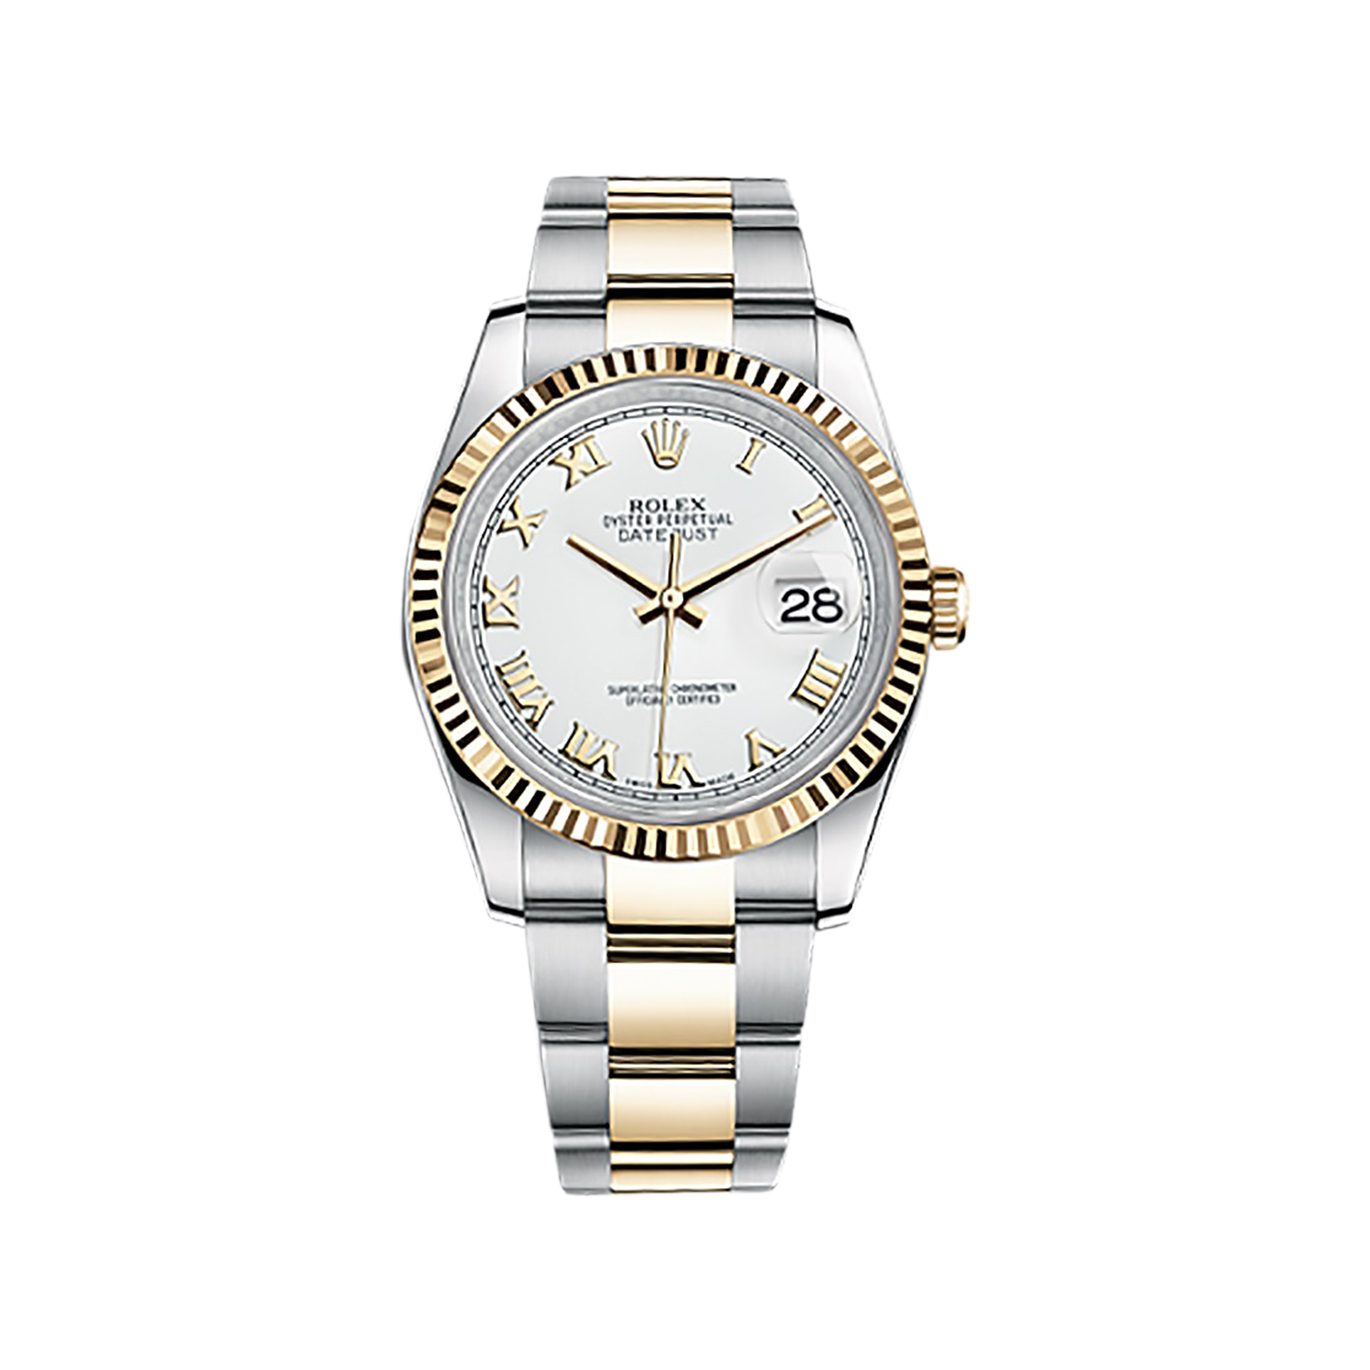 Datejust 36 116233 Gold & Stainless Steel Watch (White)